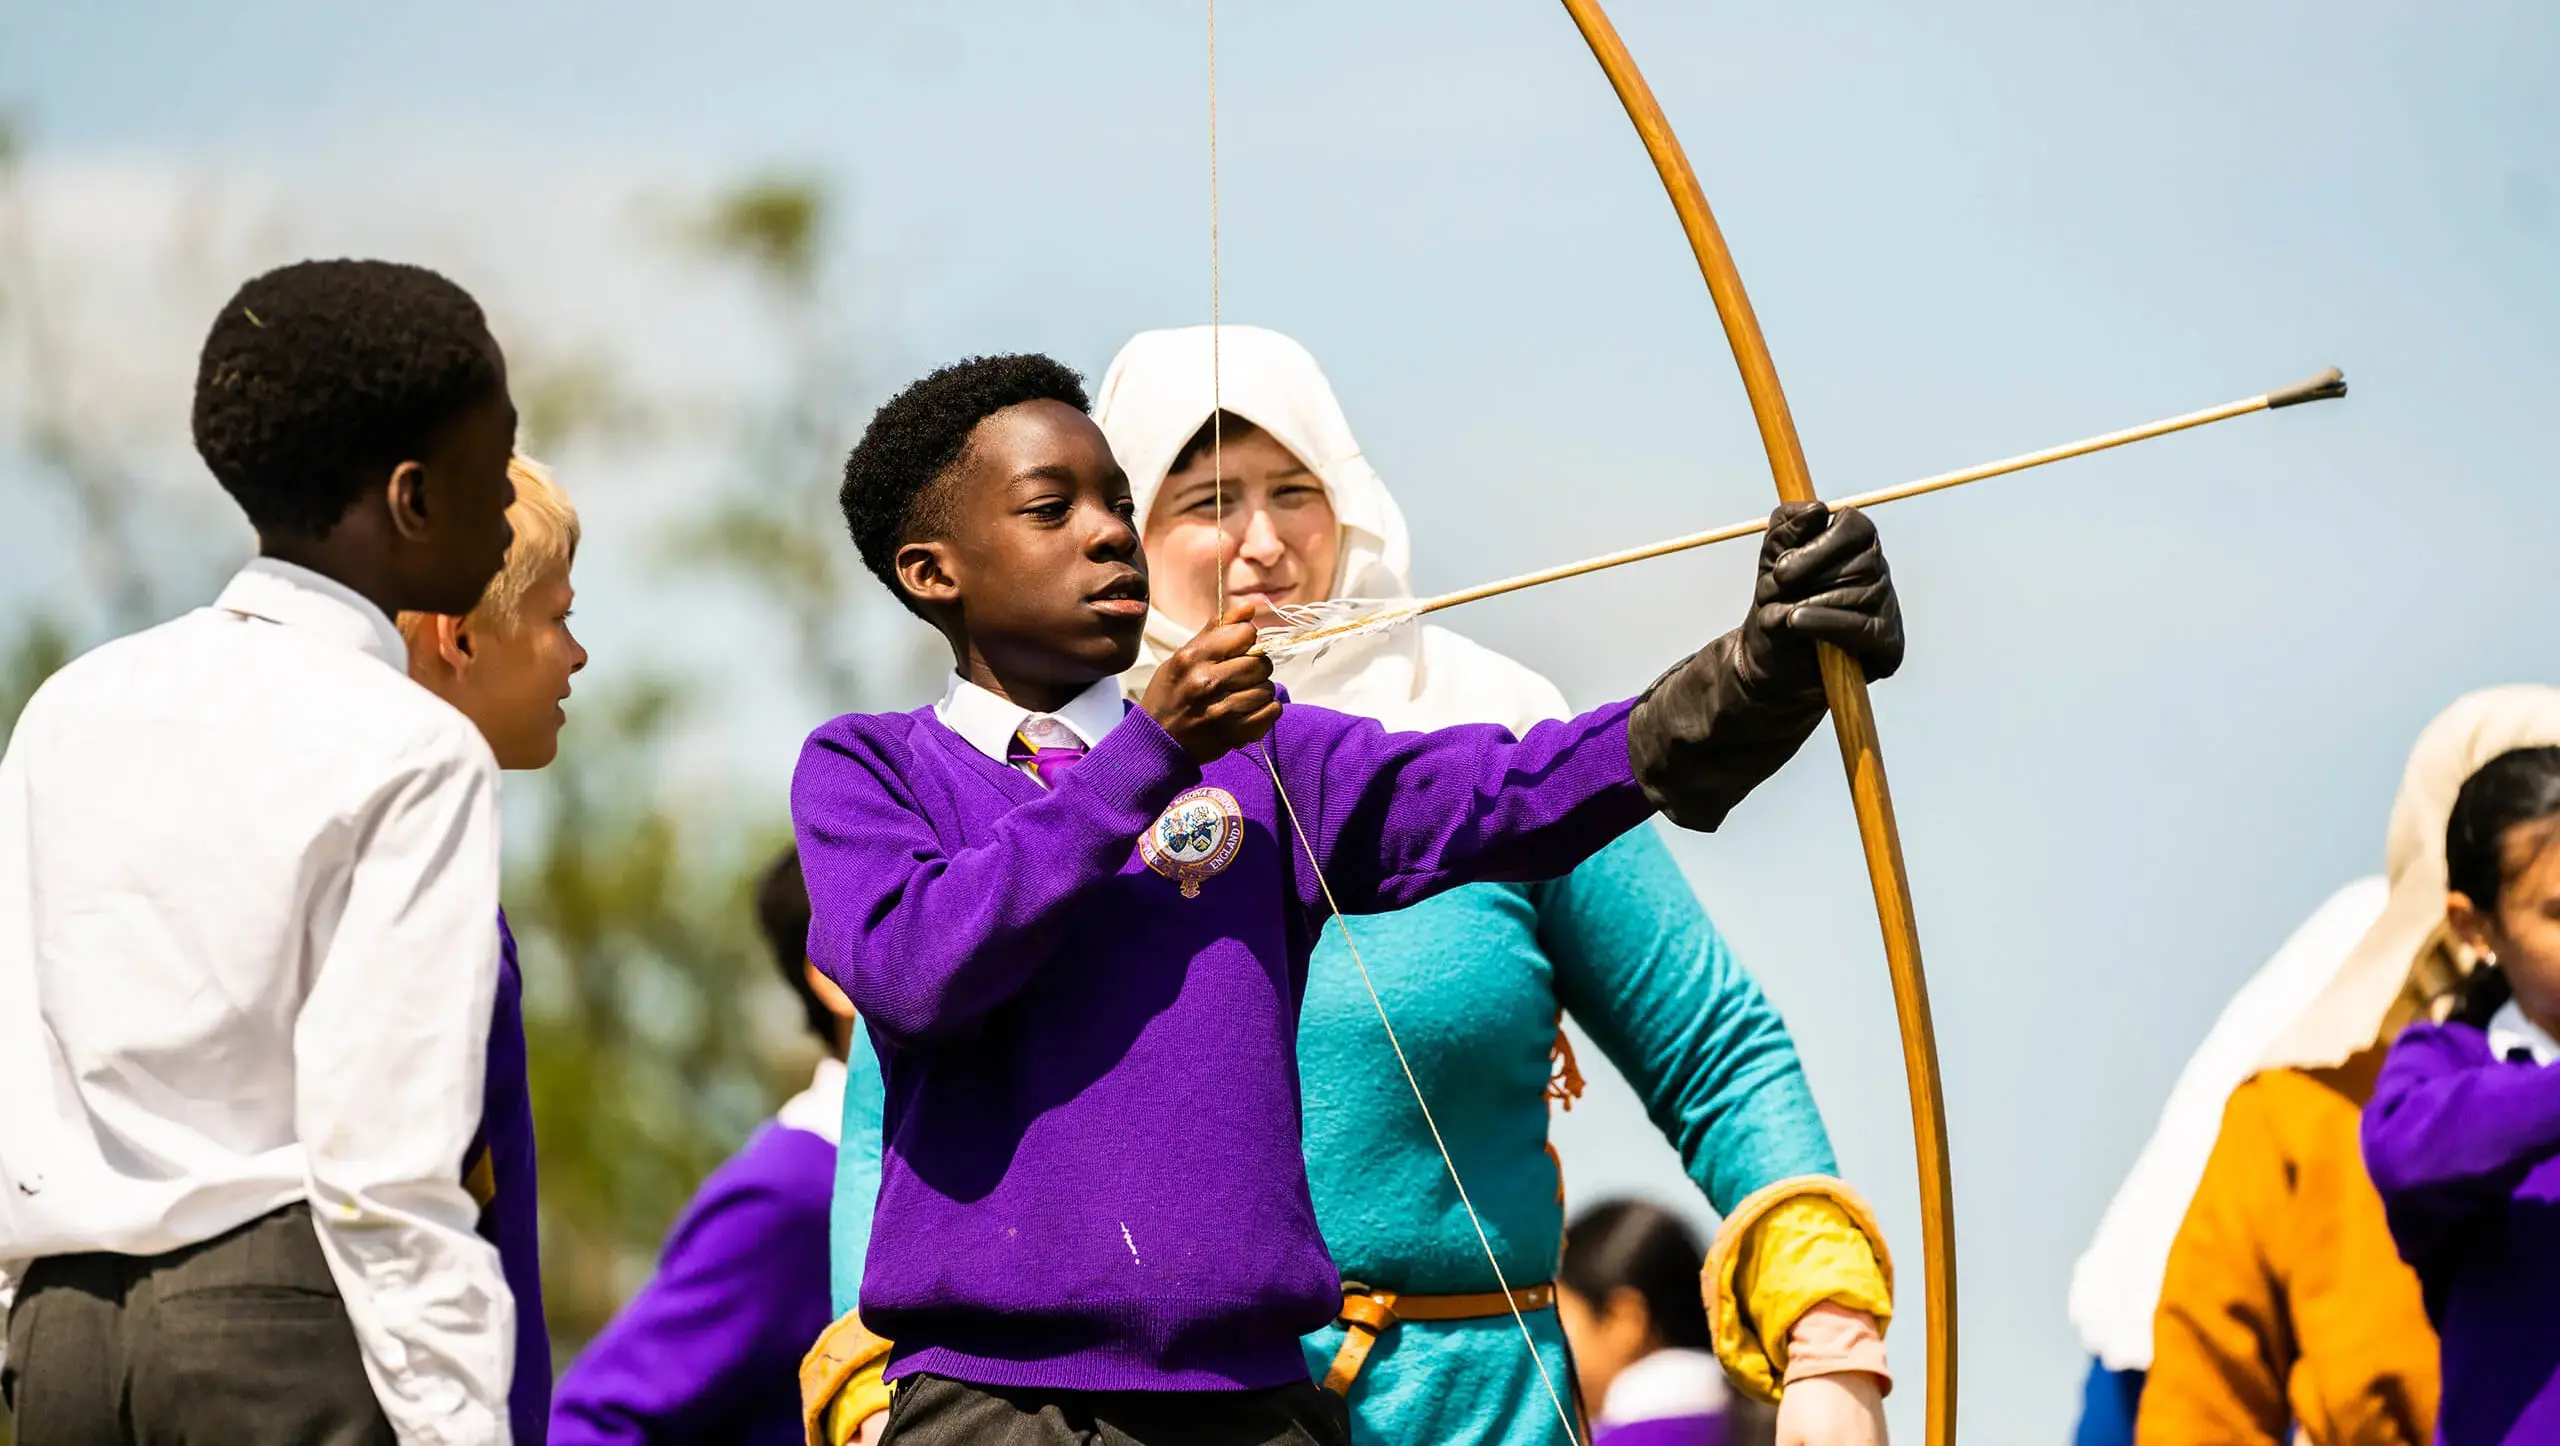 King's Magna pupil shooting a bow and arrow